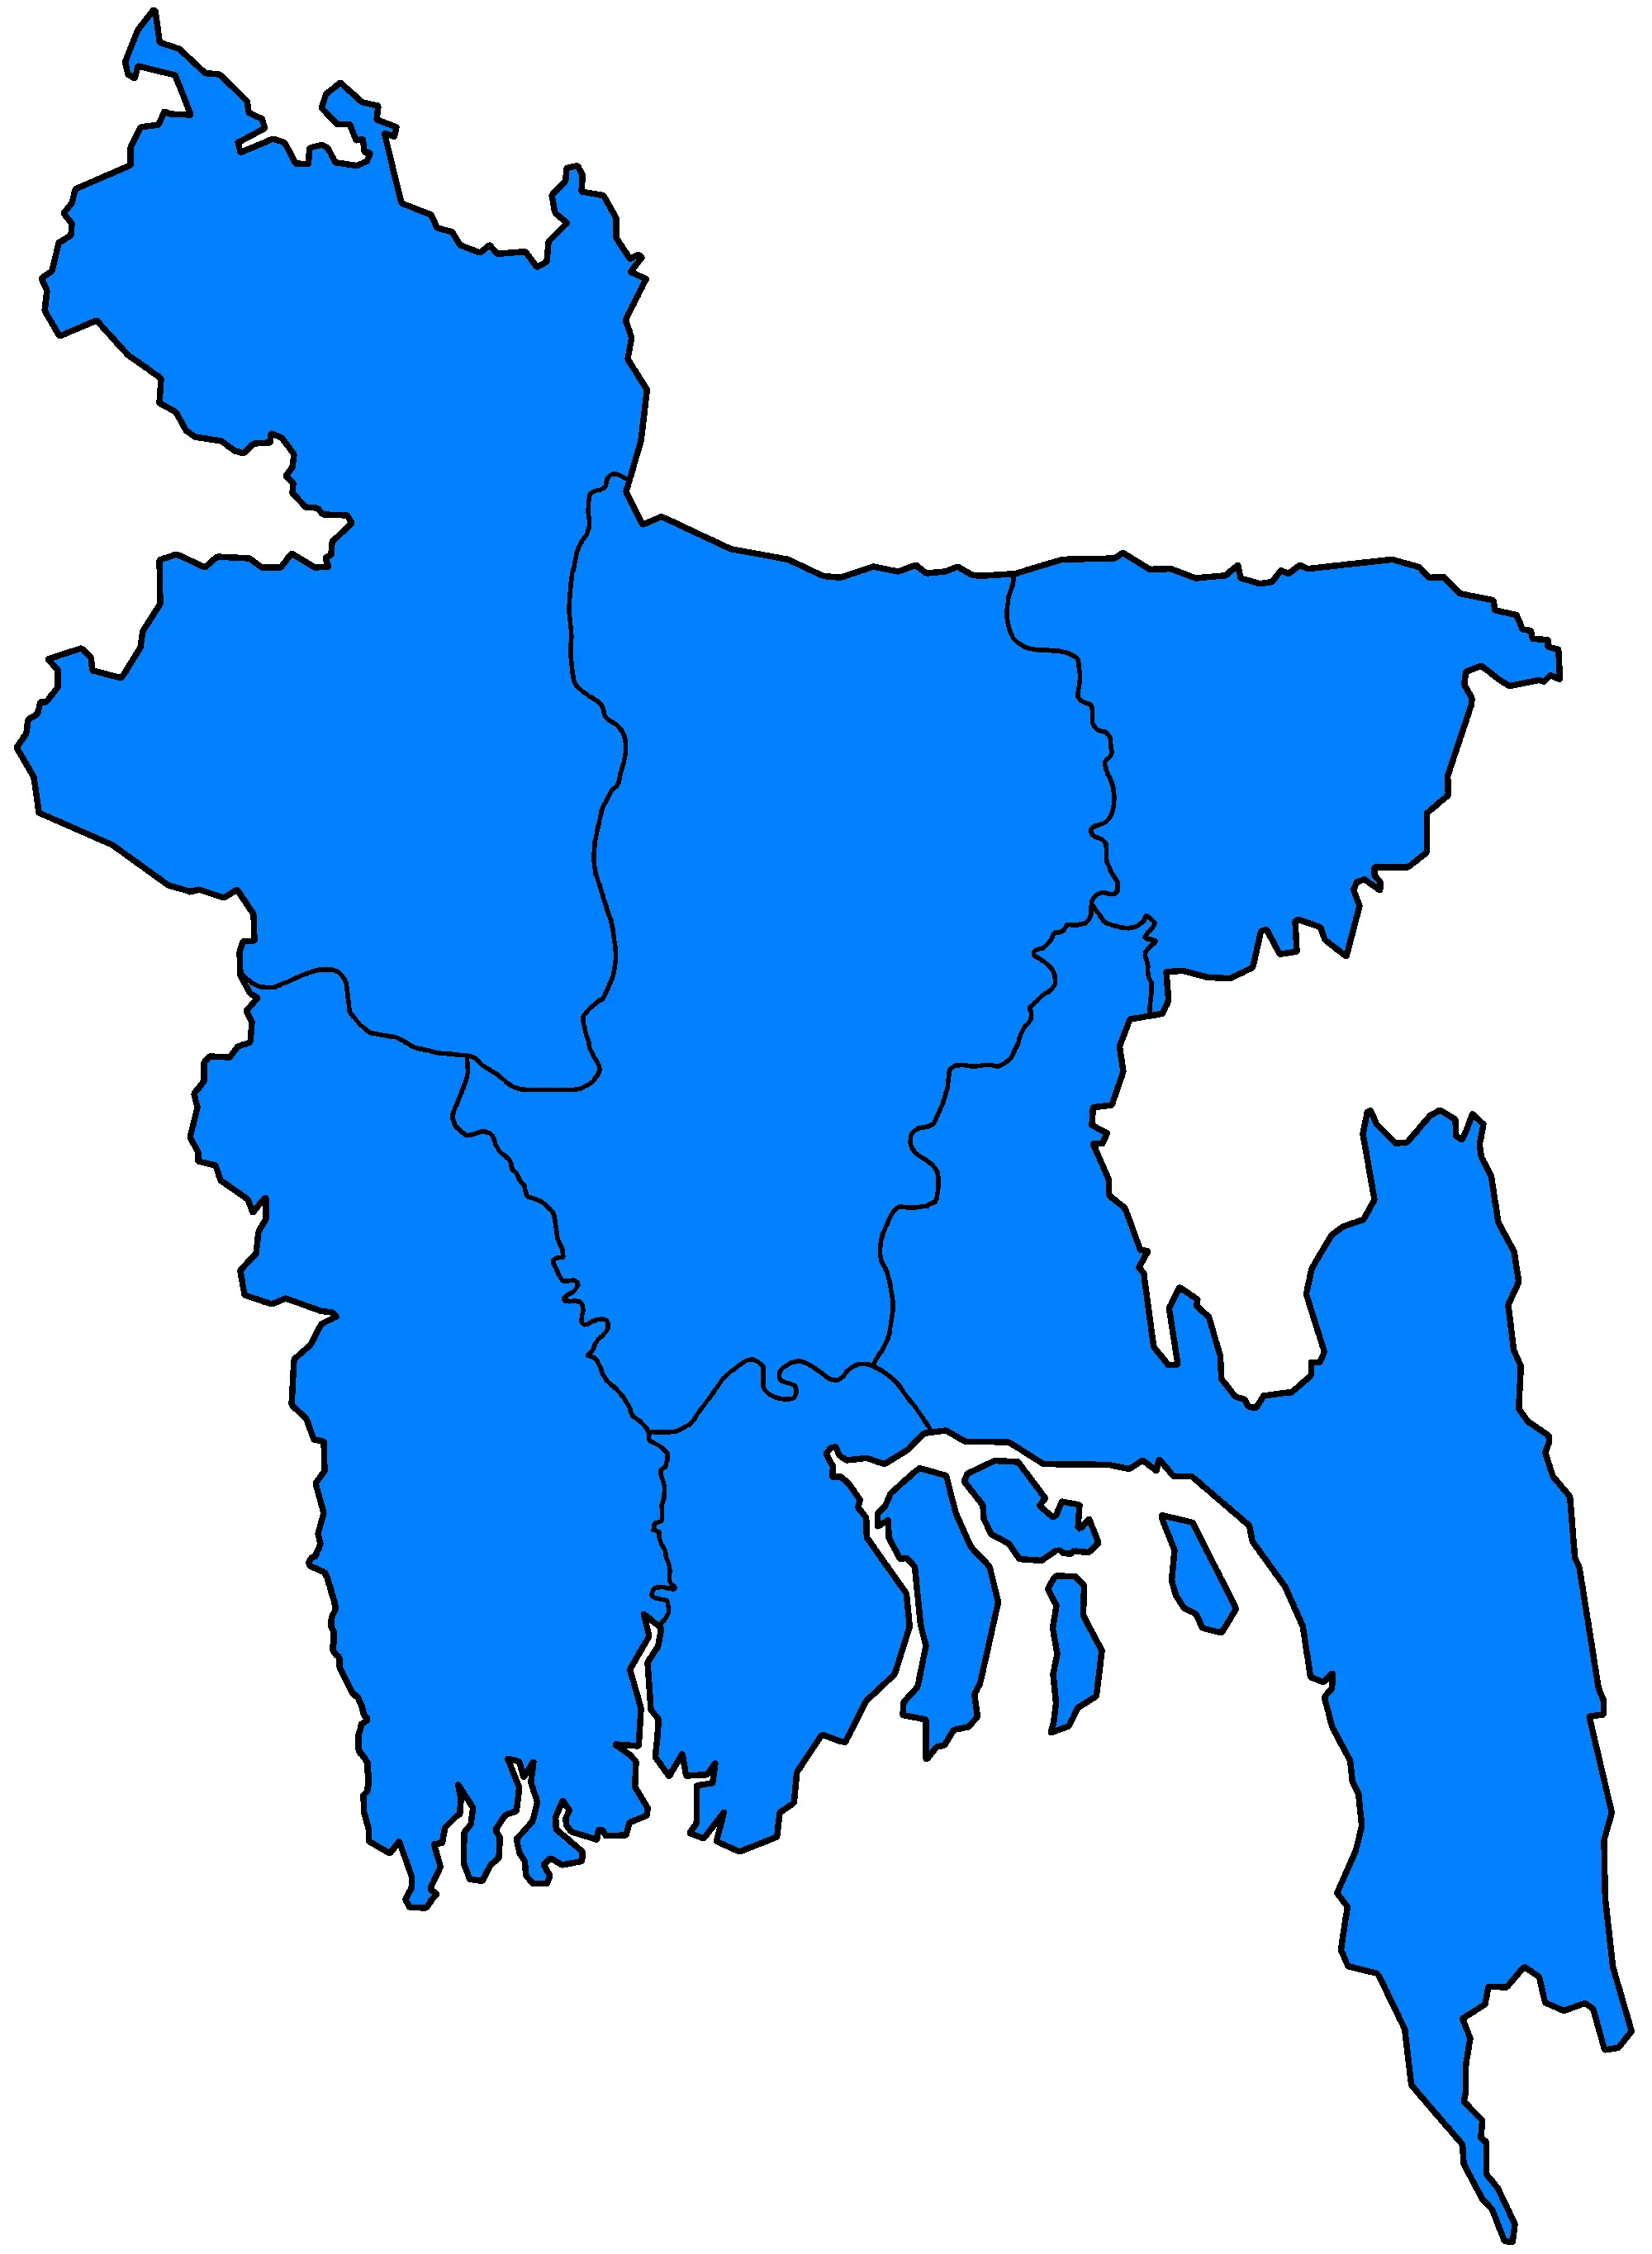 Bangladesh Divisions Flood Hit Between July 3 And August 15 2007